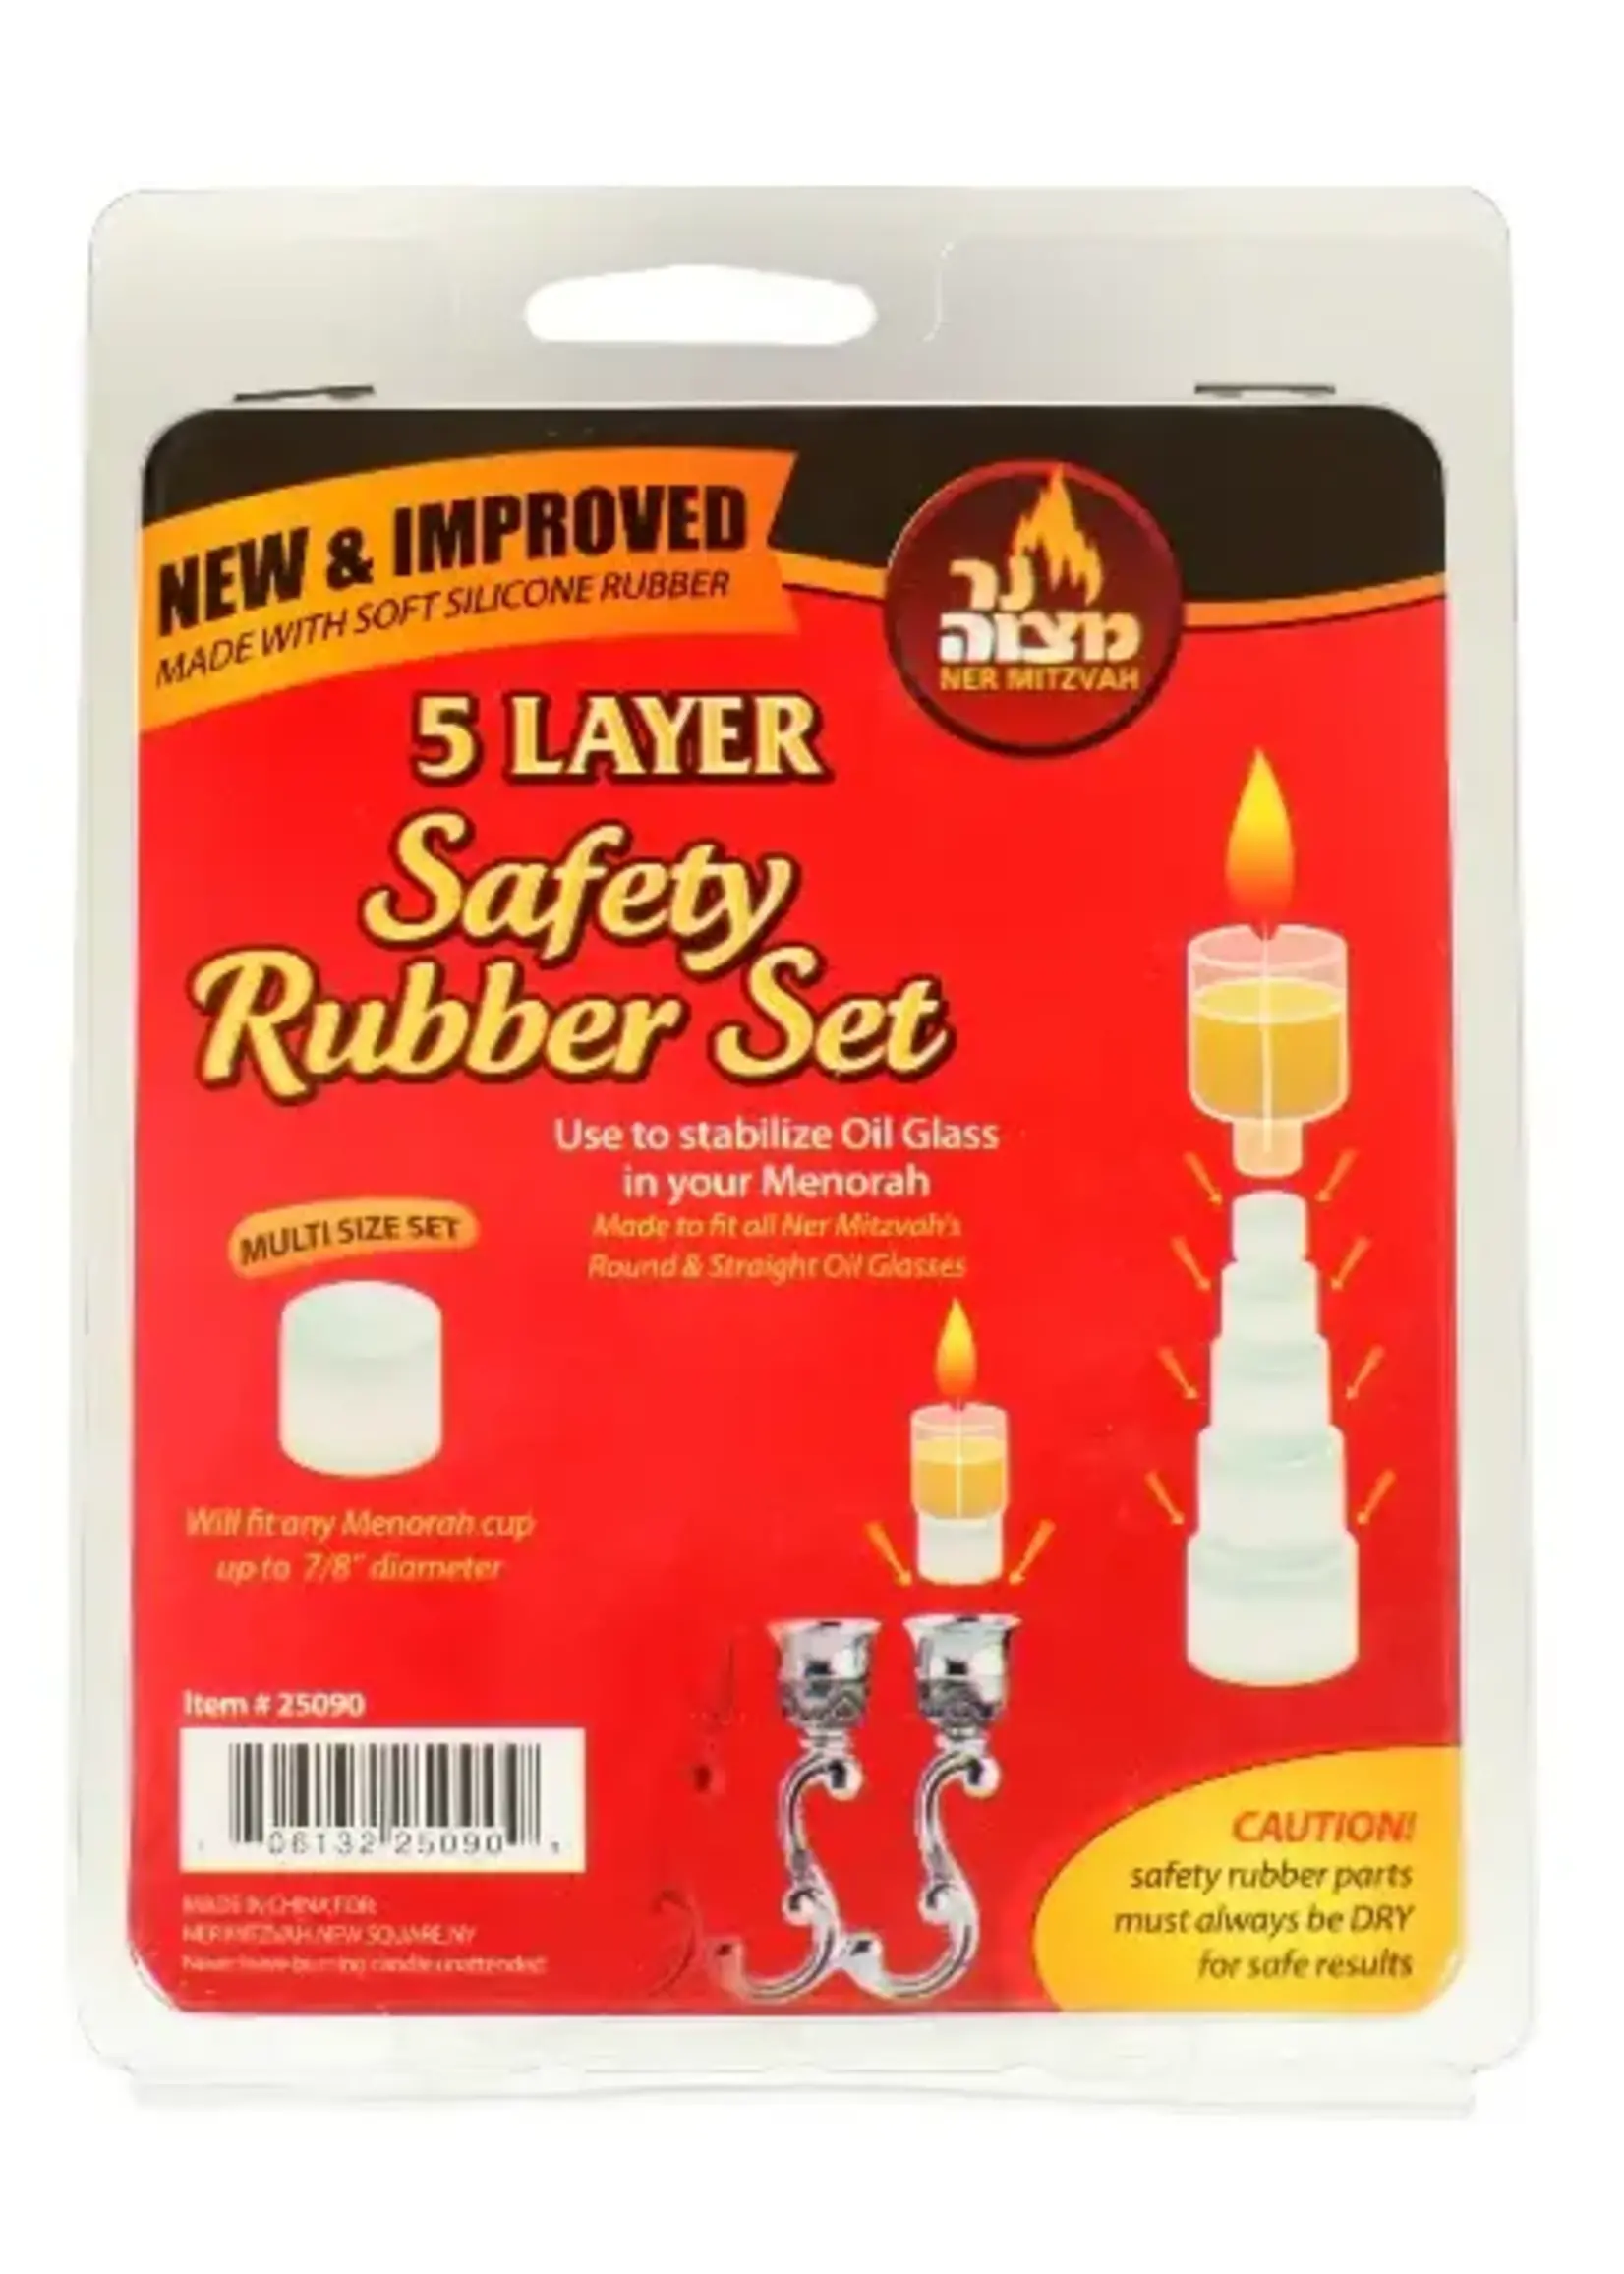 5 Layer Safety Rubber Set 9PK